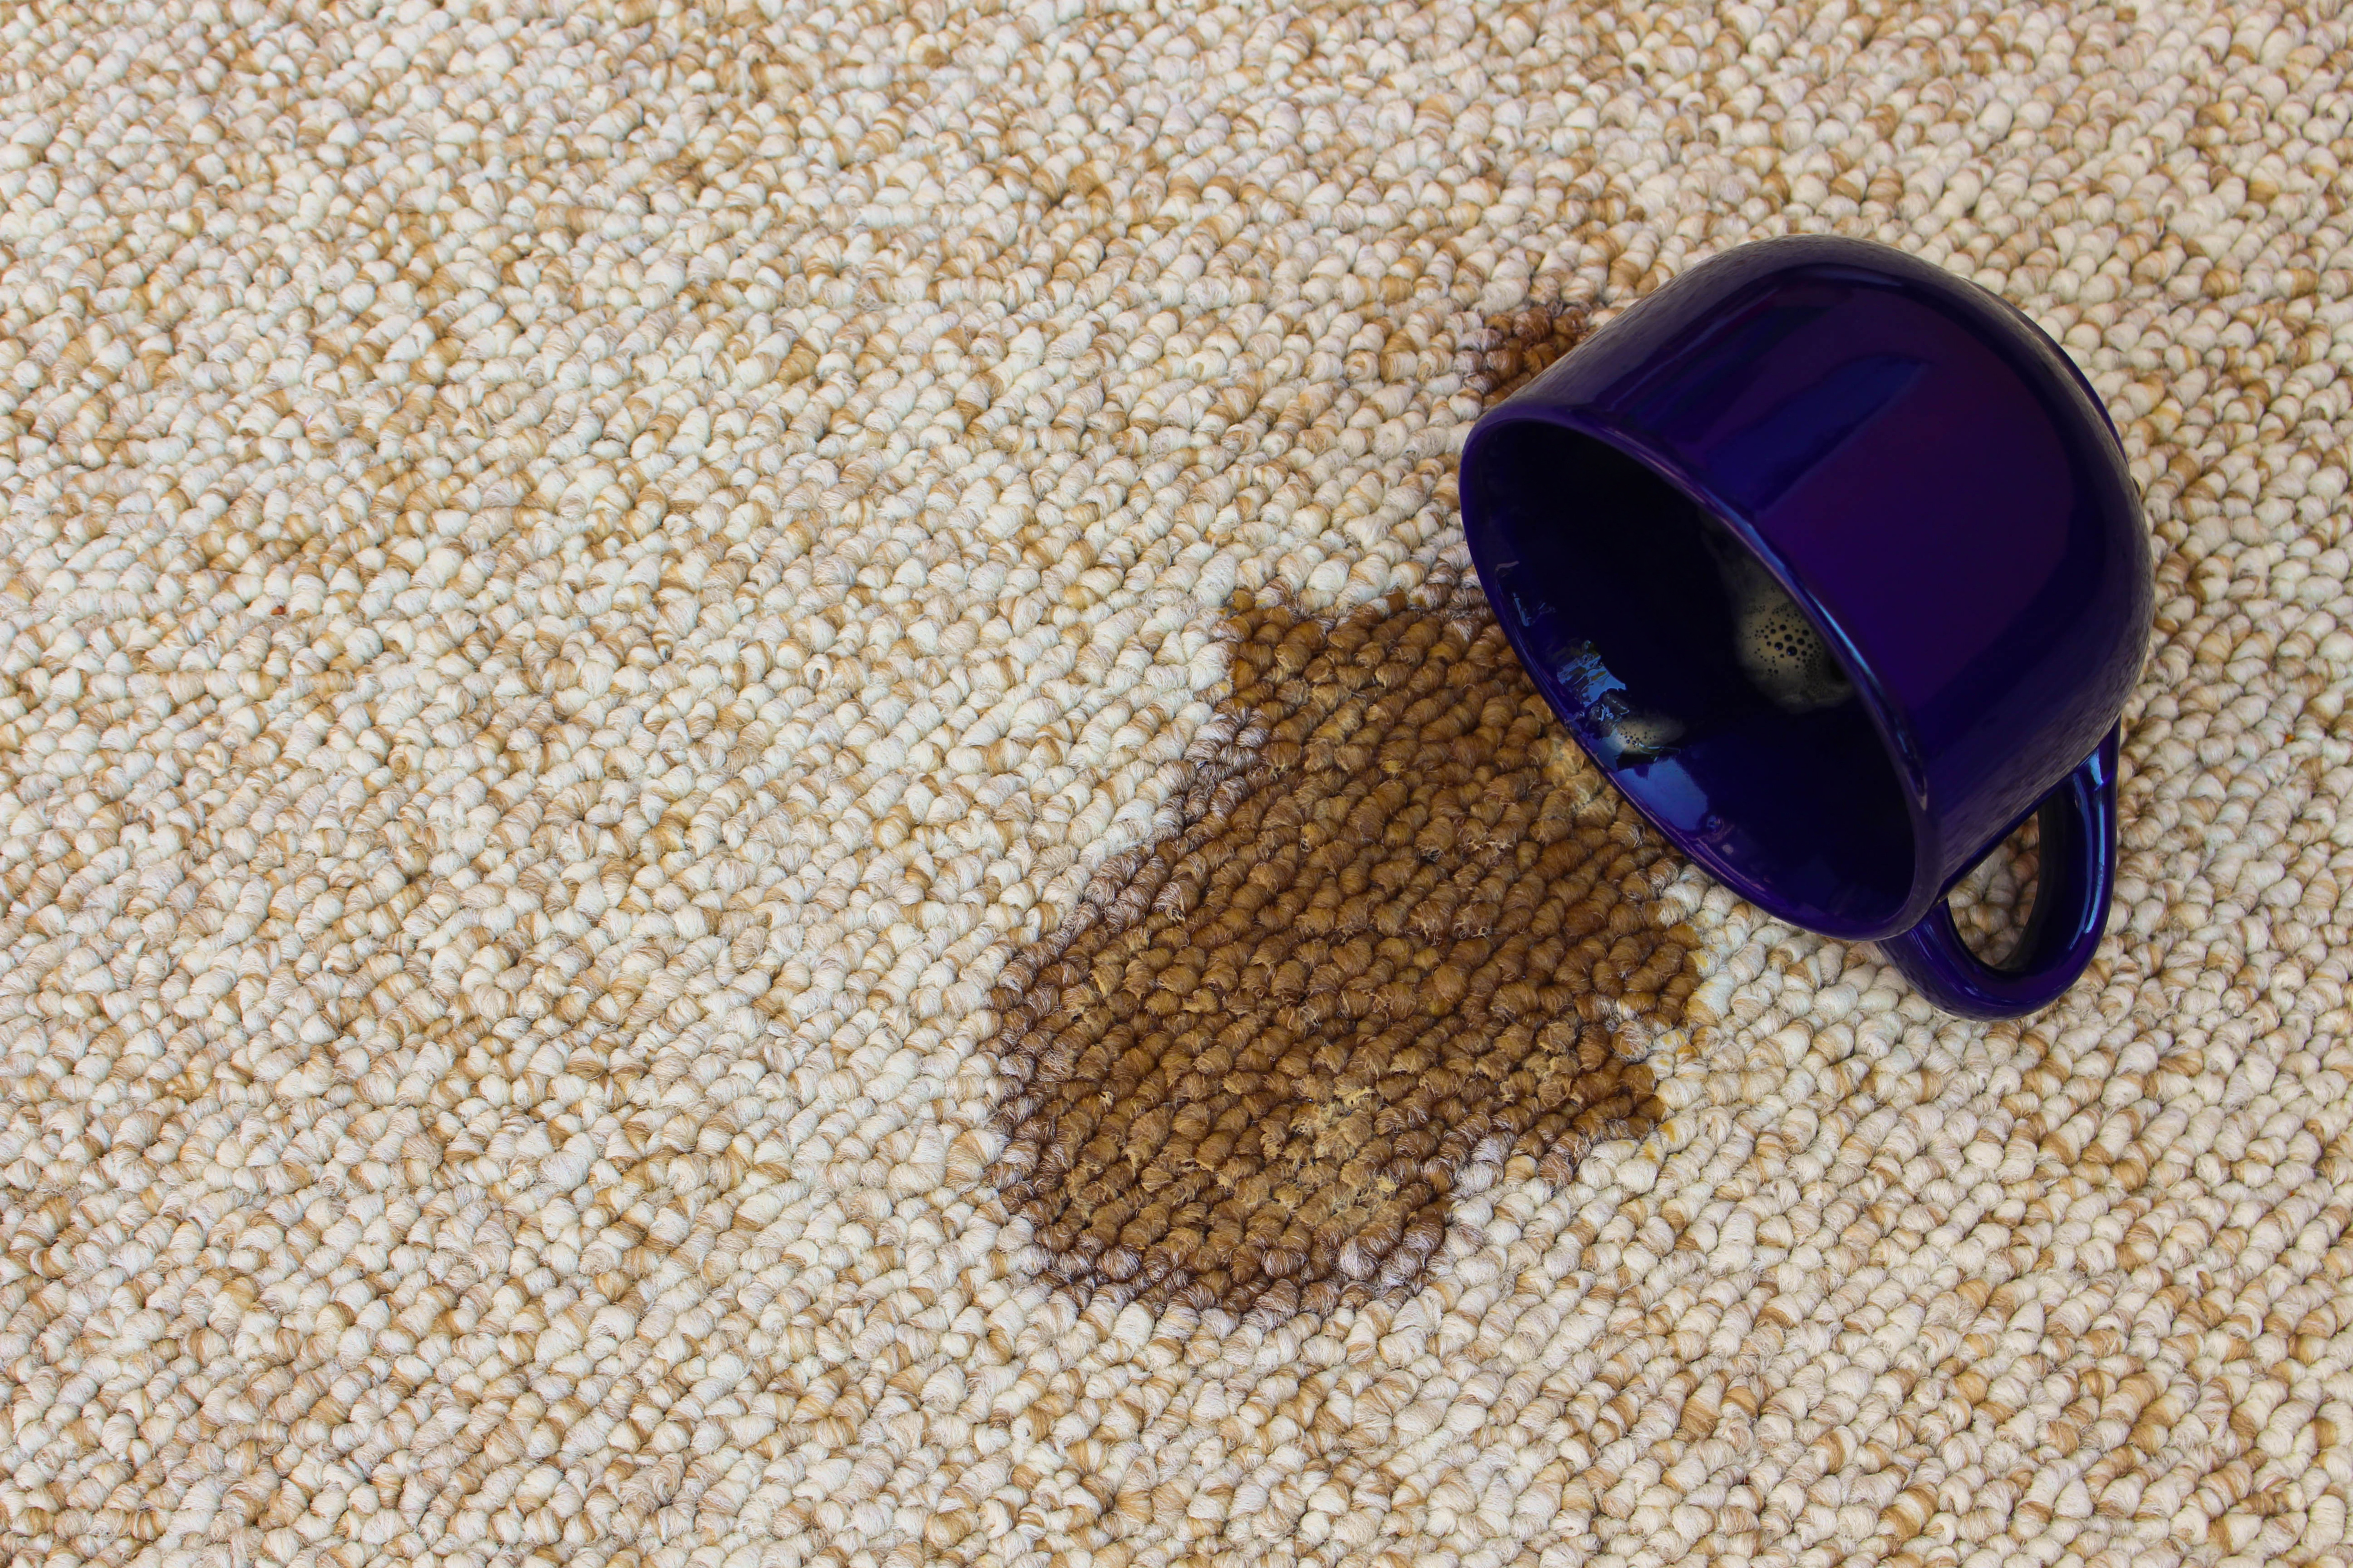 How to Remove Coffee Stains and Pet Stains from your Carpet